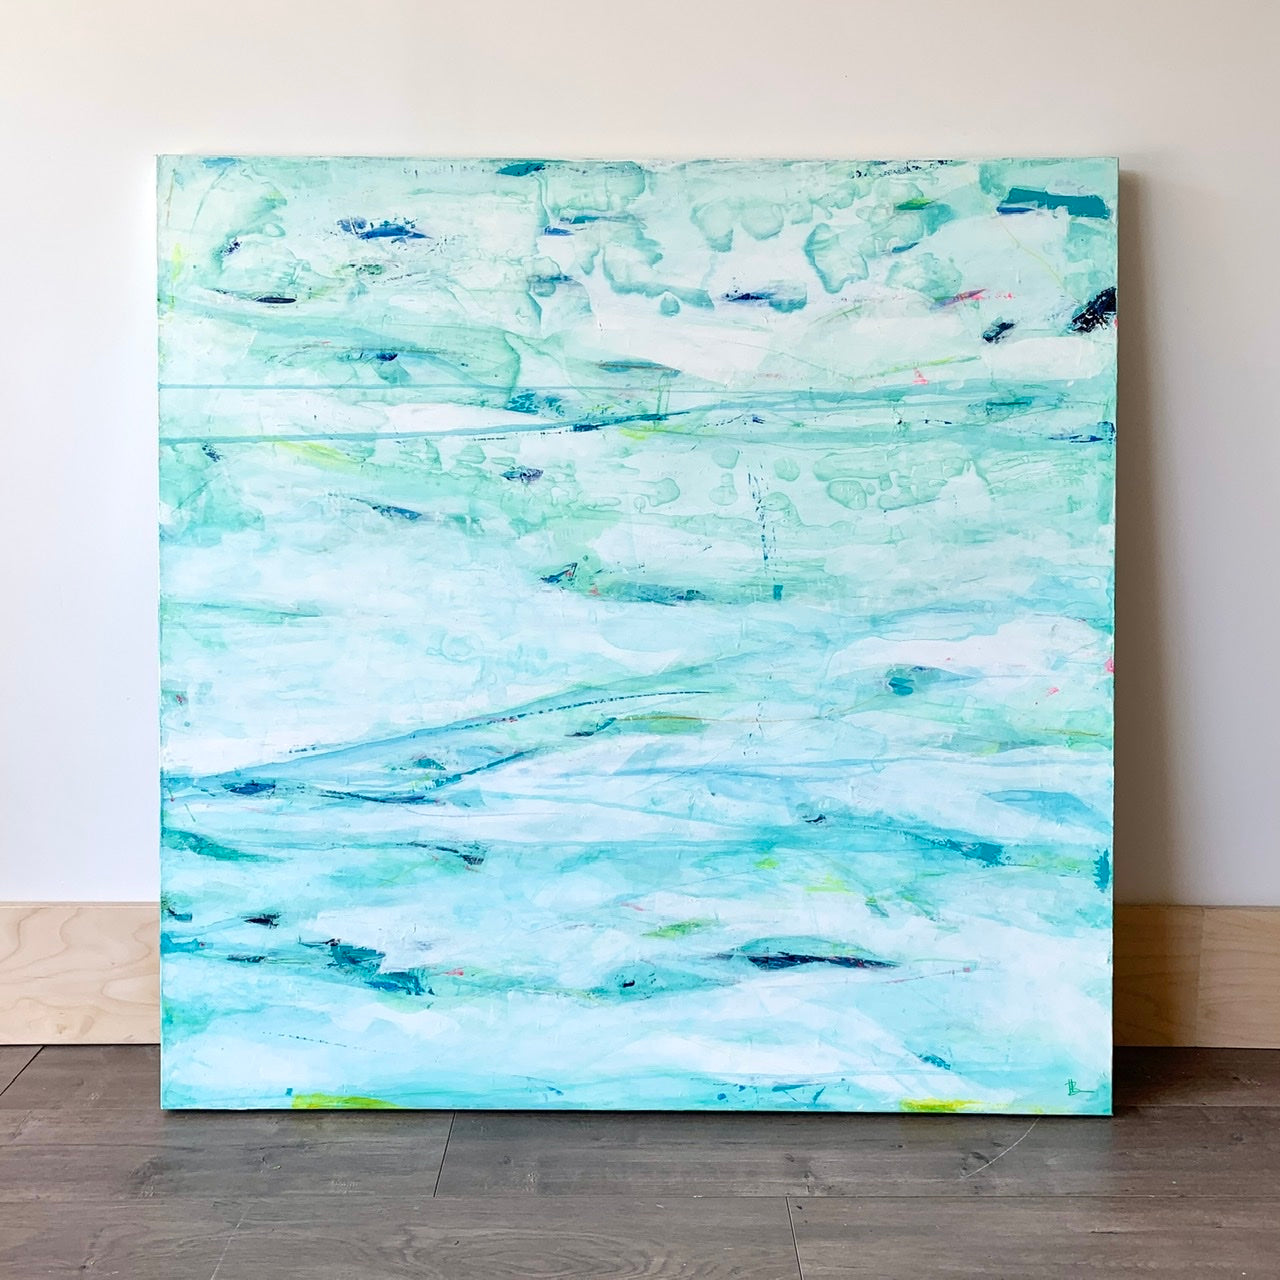 Dive In - 48 x 48